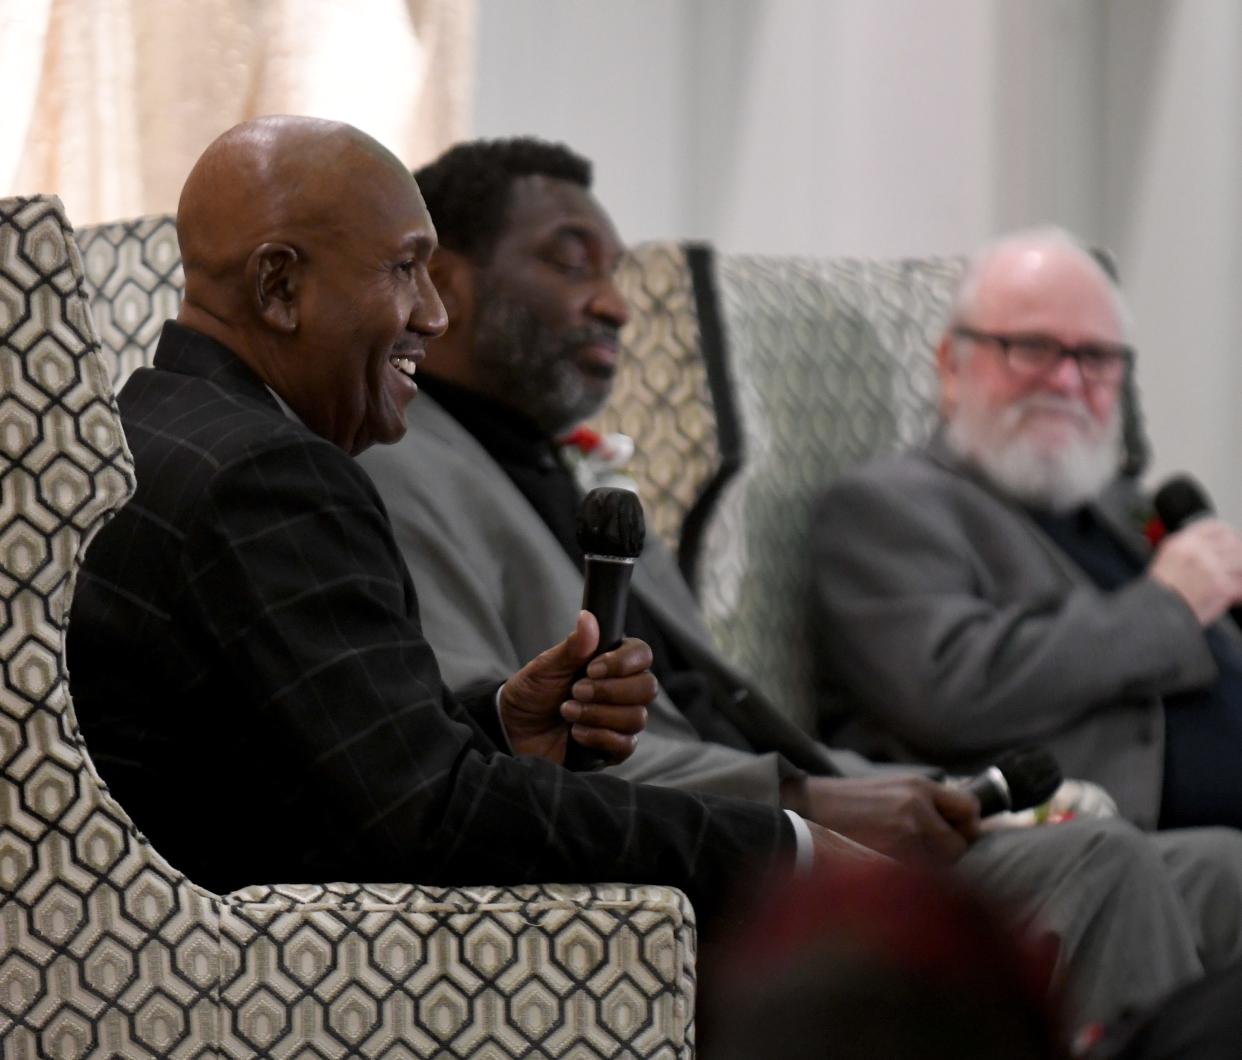 The Elevate ... Educate Panel Discussion on Thursday, Jan. 12, 2023, featured James "Shack" Harris, Doug Williams and Joe Horrigan during The 30th Annual MLK Mayors' Breakfast at DoubleTree by Hilton in downtown Canton.